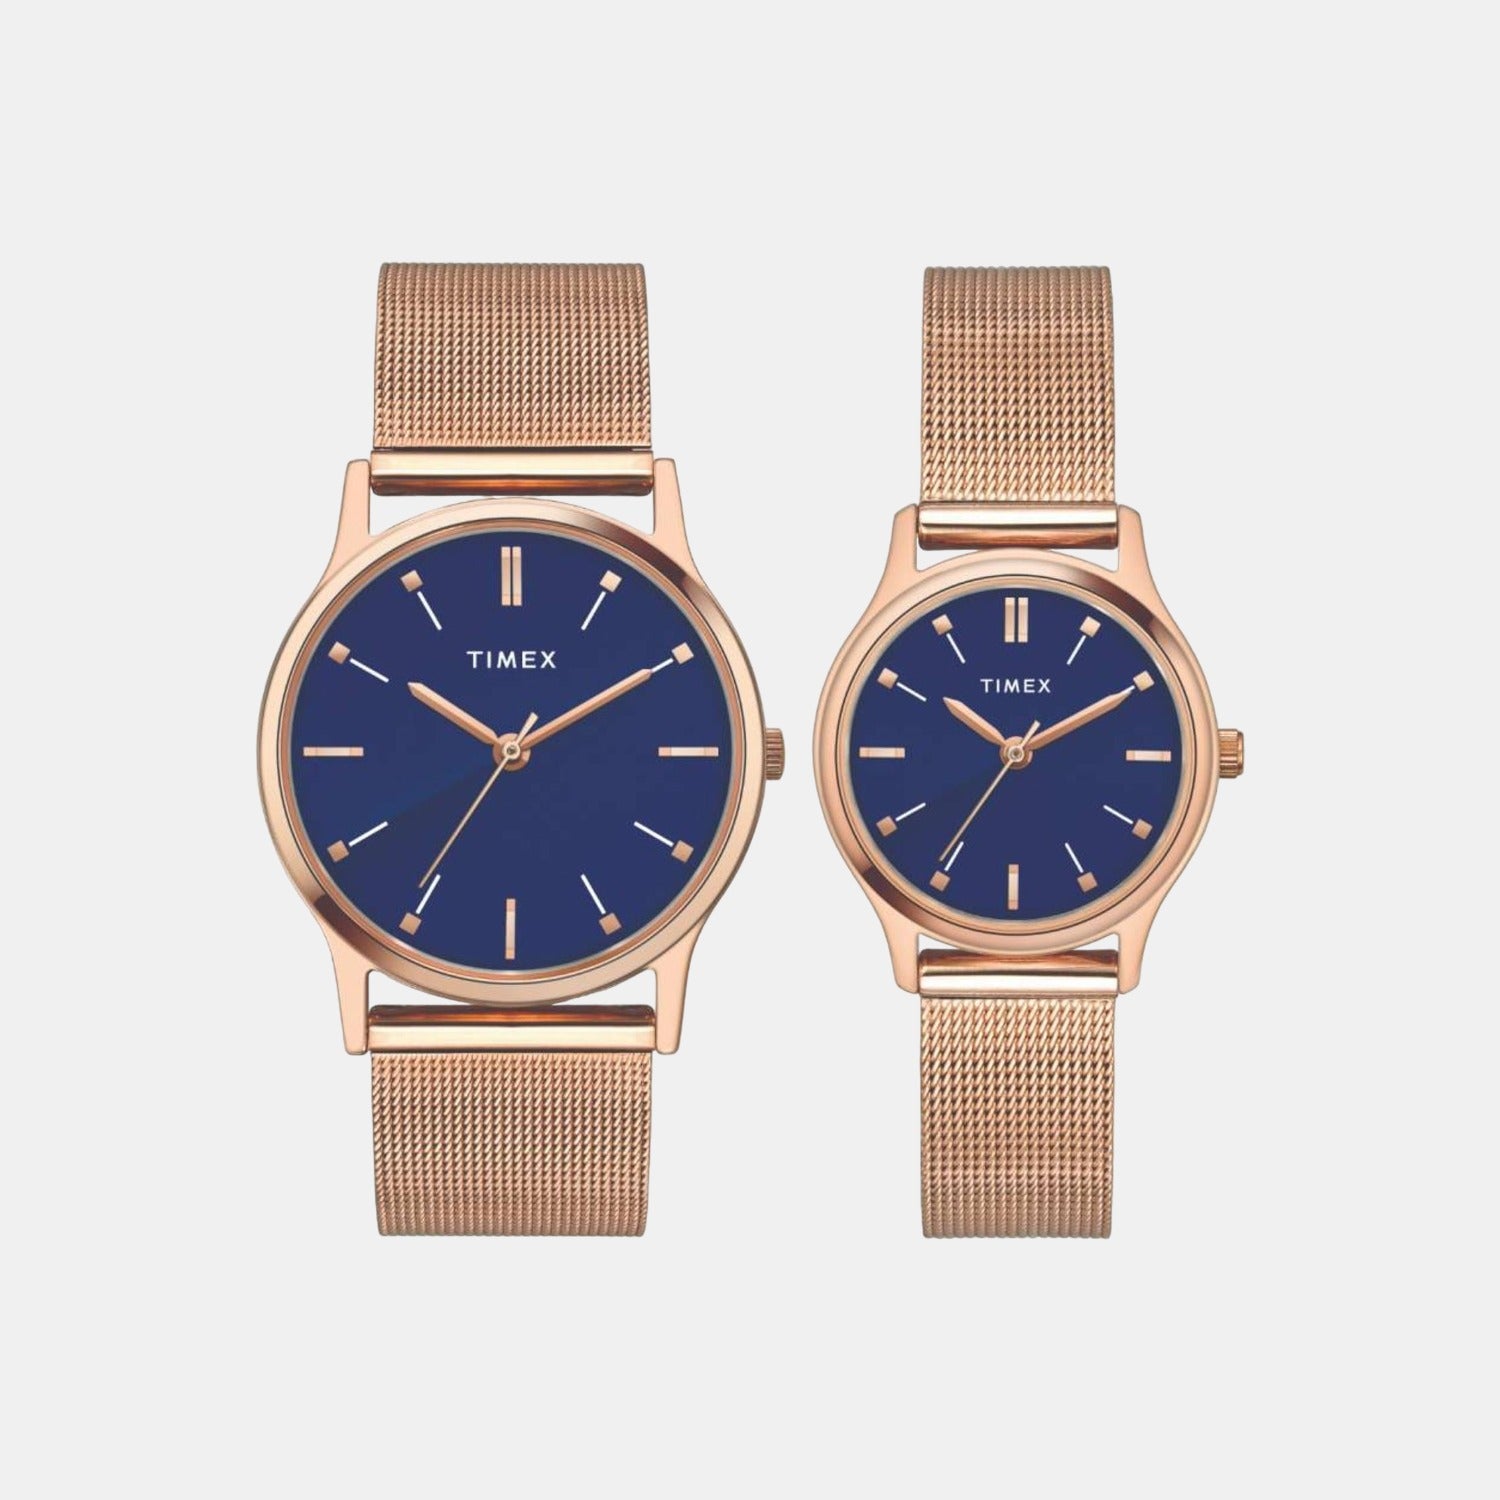 High Quality Stainless Steel Automatic Couple Watch With Baked Blue Dial,  Sapphire Gray Lens, And Deep Water Resistance Perfect Fashion Gift For Men  From Fashionwatch20, $13.81 | DHgate.Com